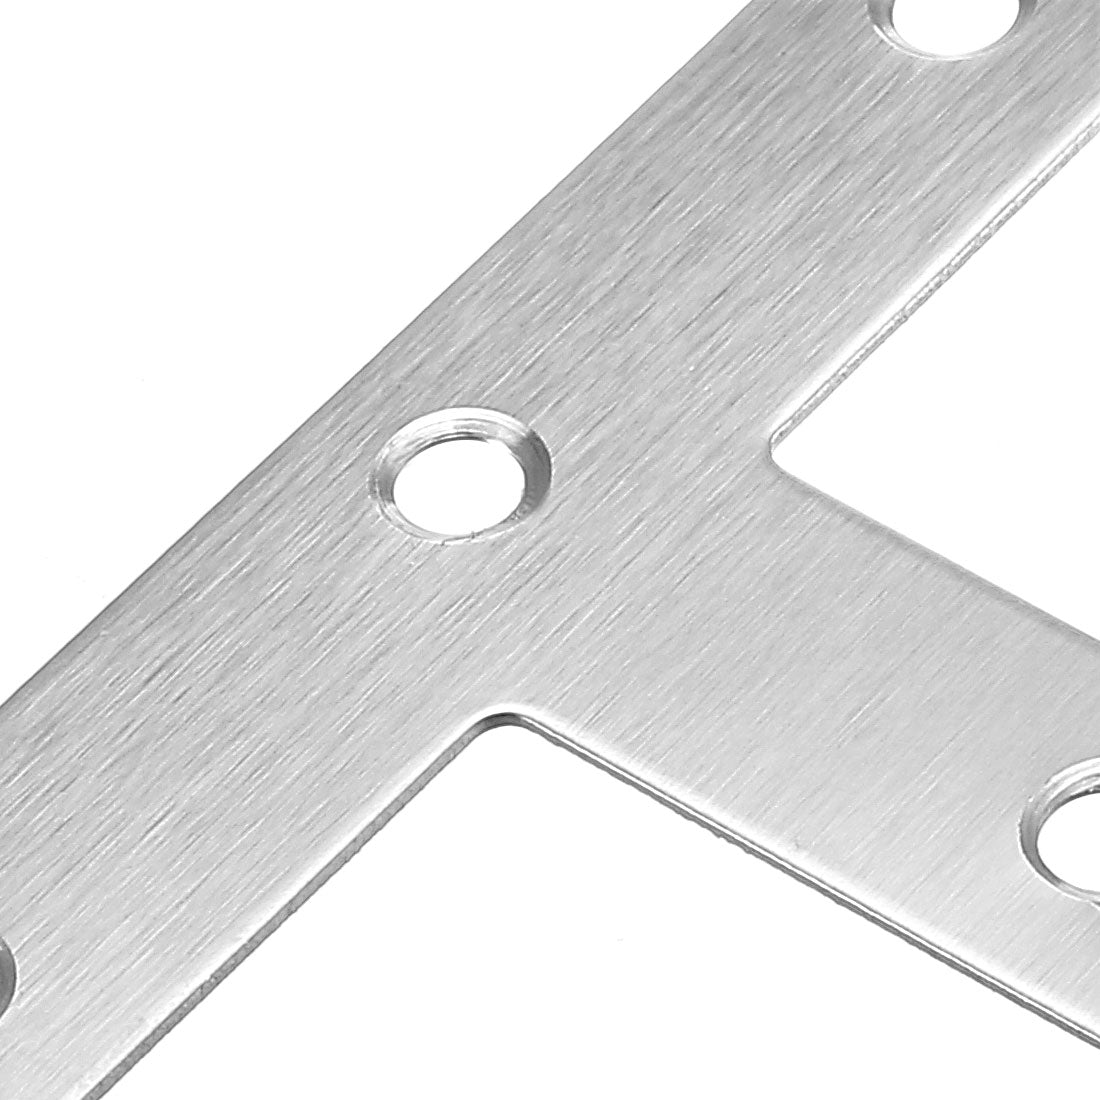 uxcell Uxcell Flat T Shape Repair Mending Plate, 80mmx80mm, Stainless steel Joining Bracket Support Brace, 20 pcs